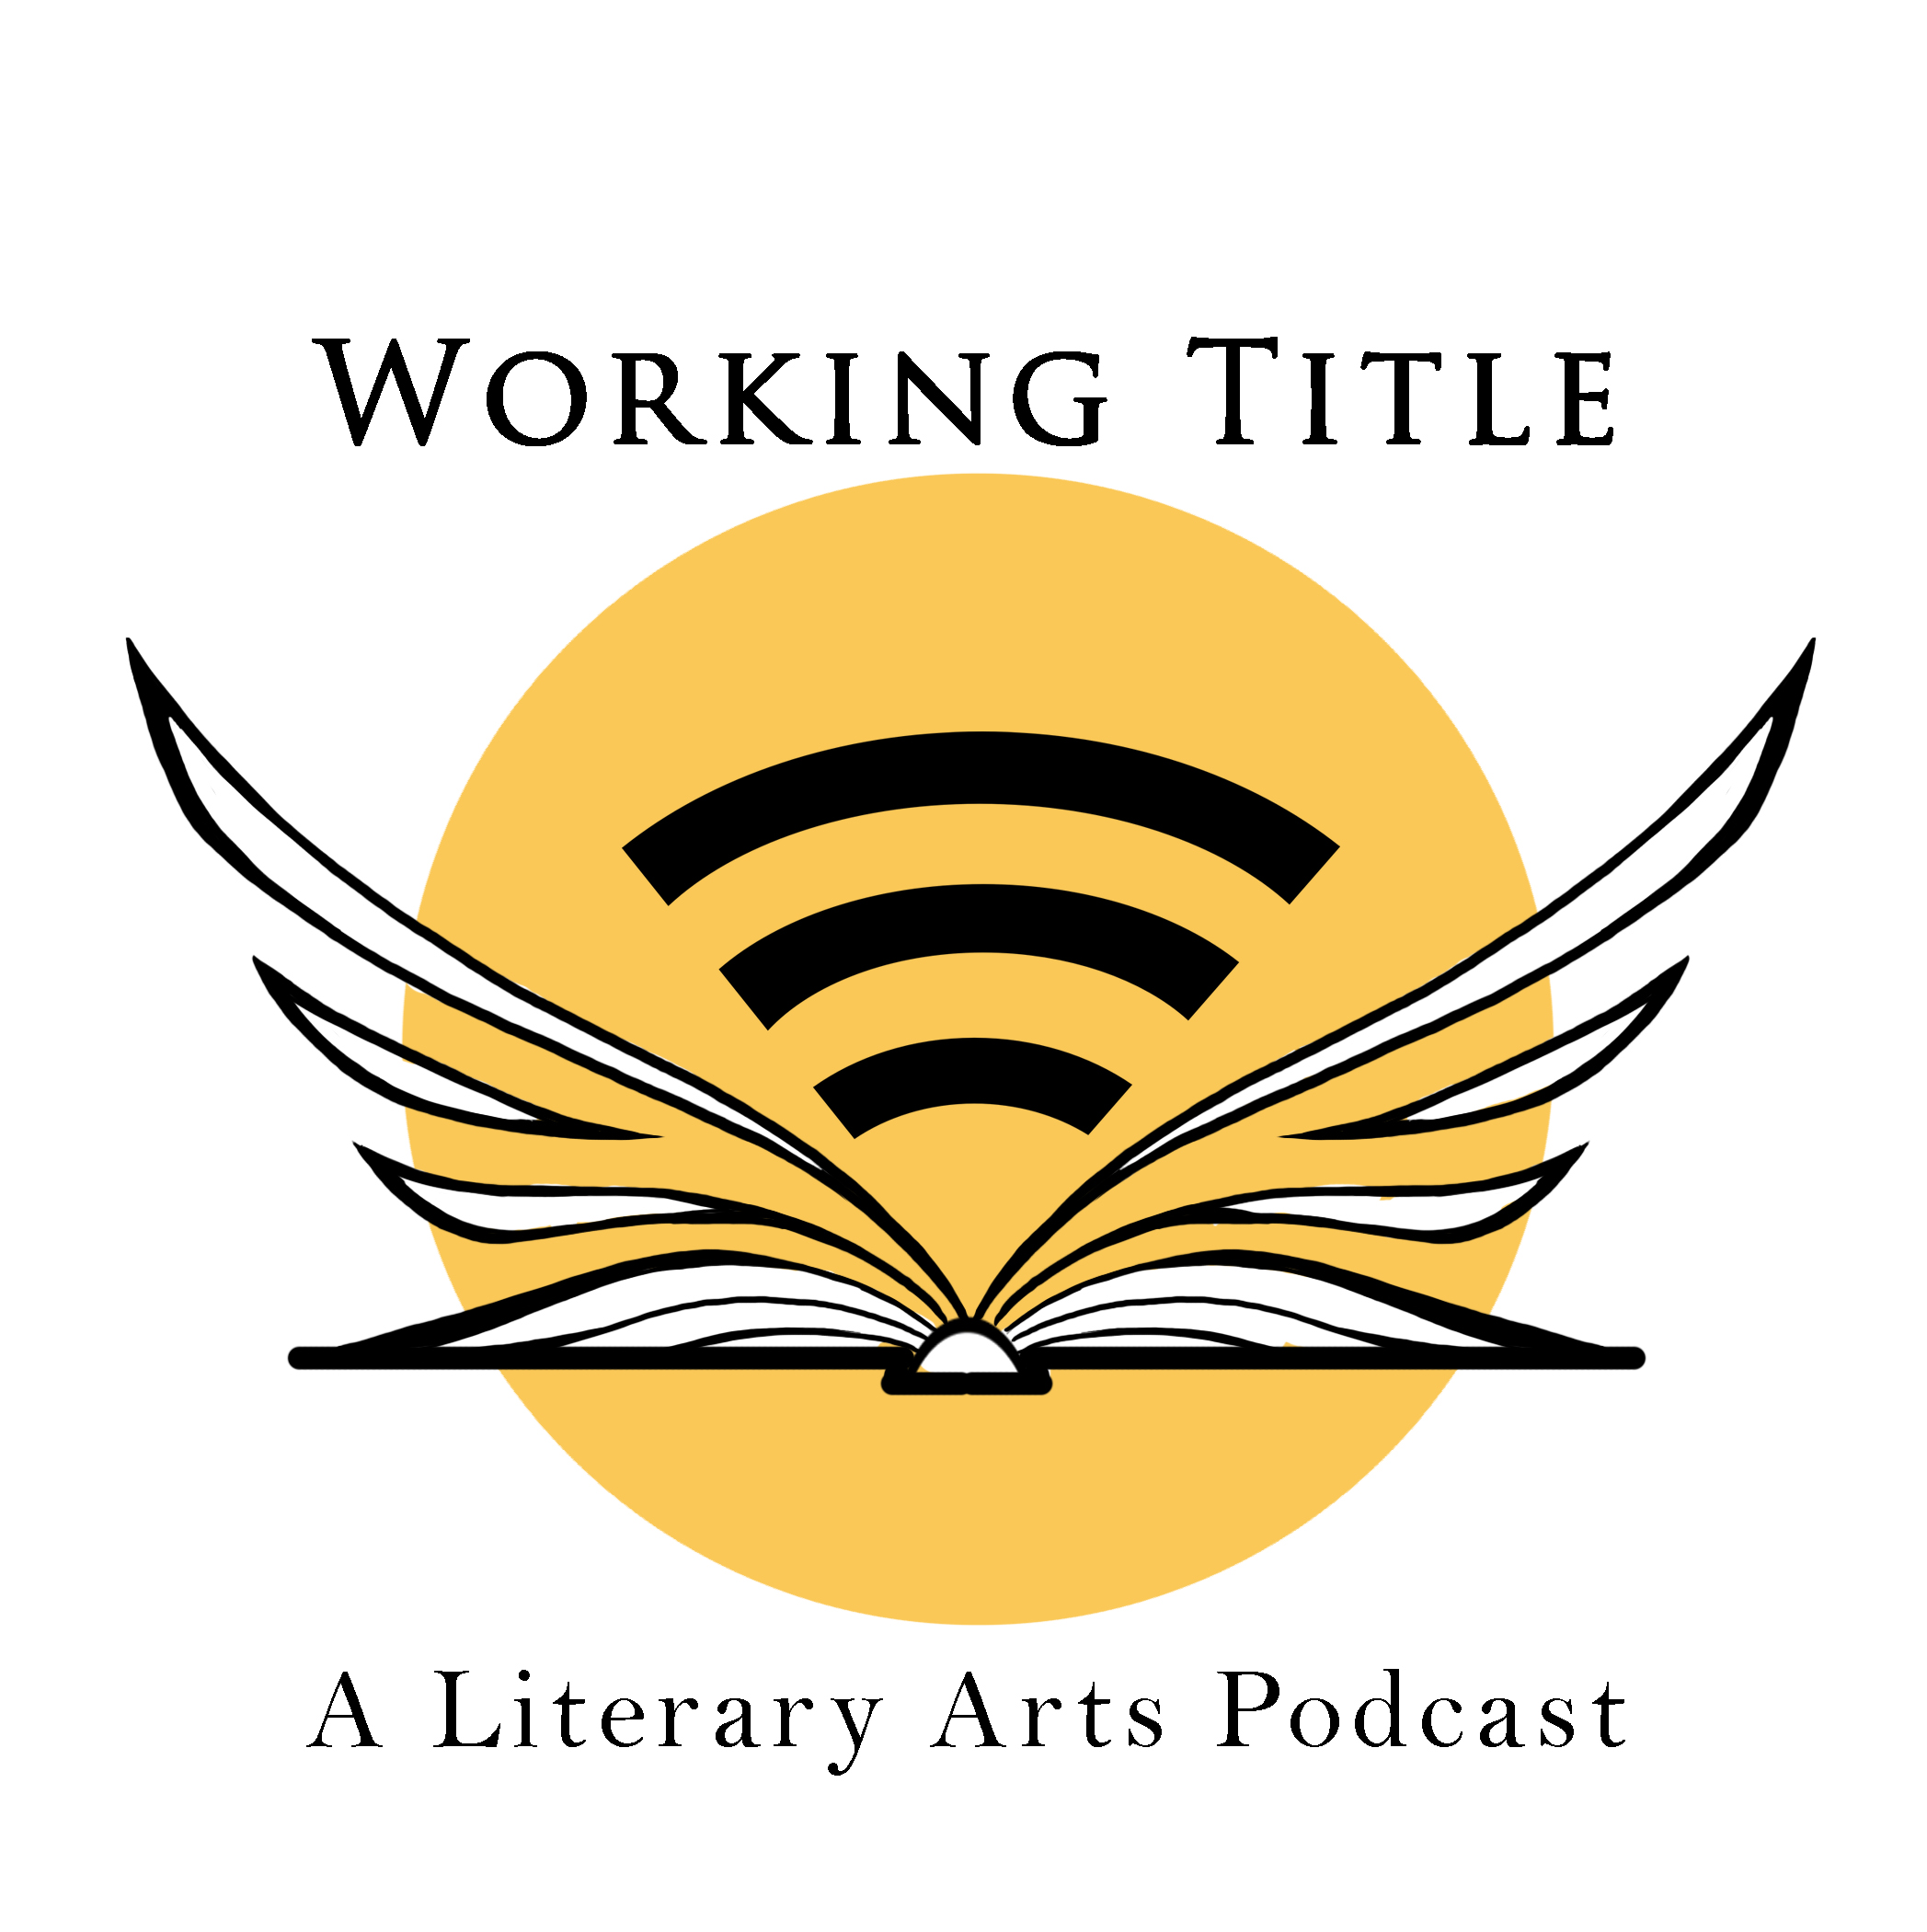 Working Title: A Literary Arts Podcast